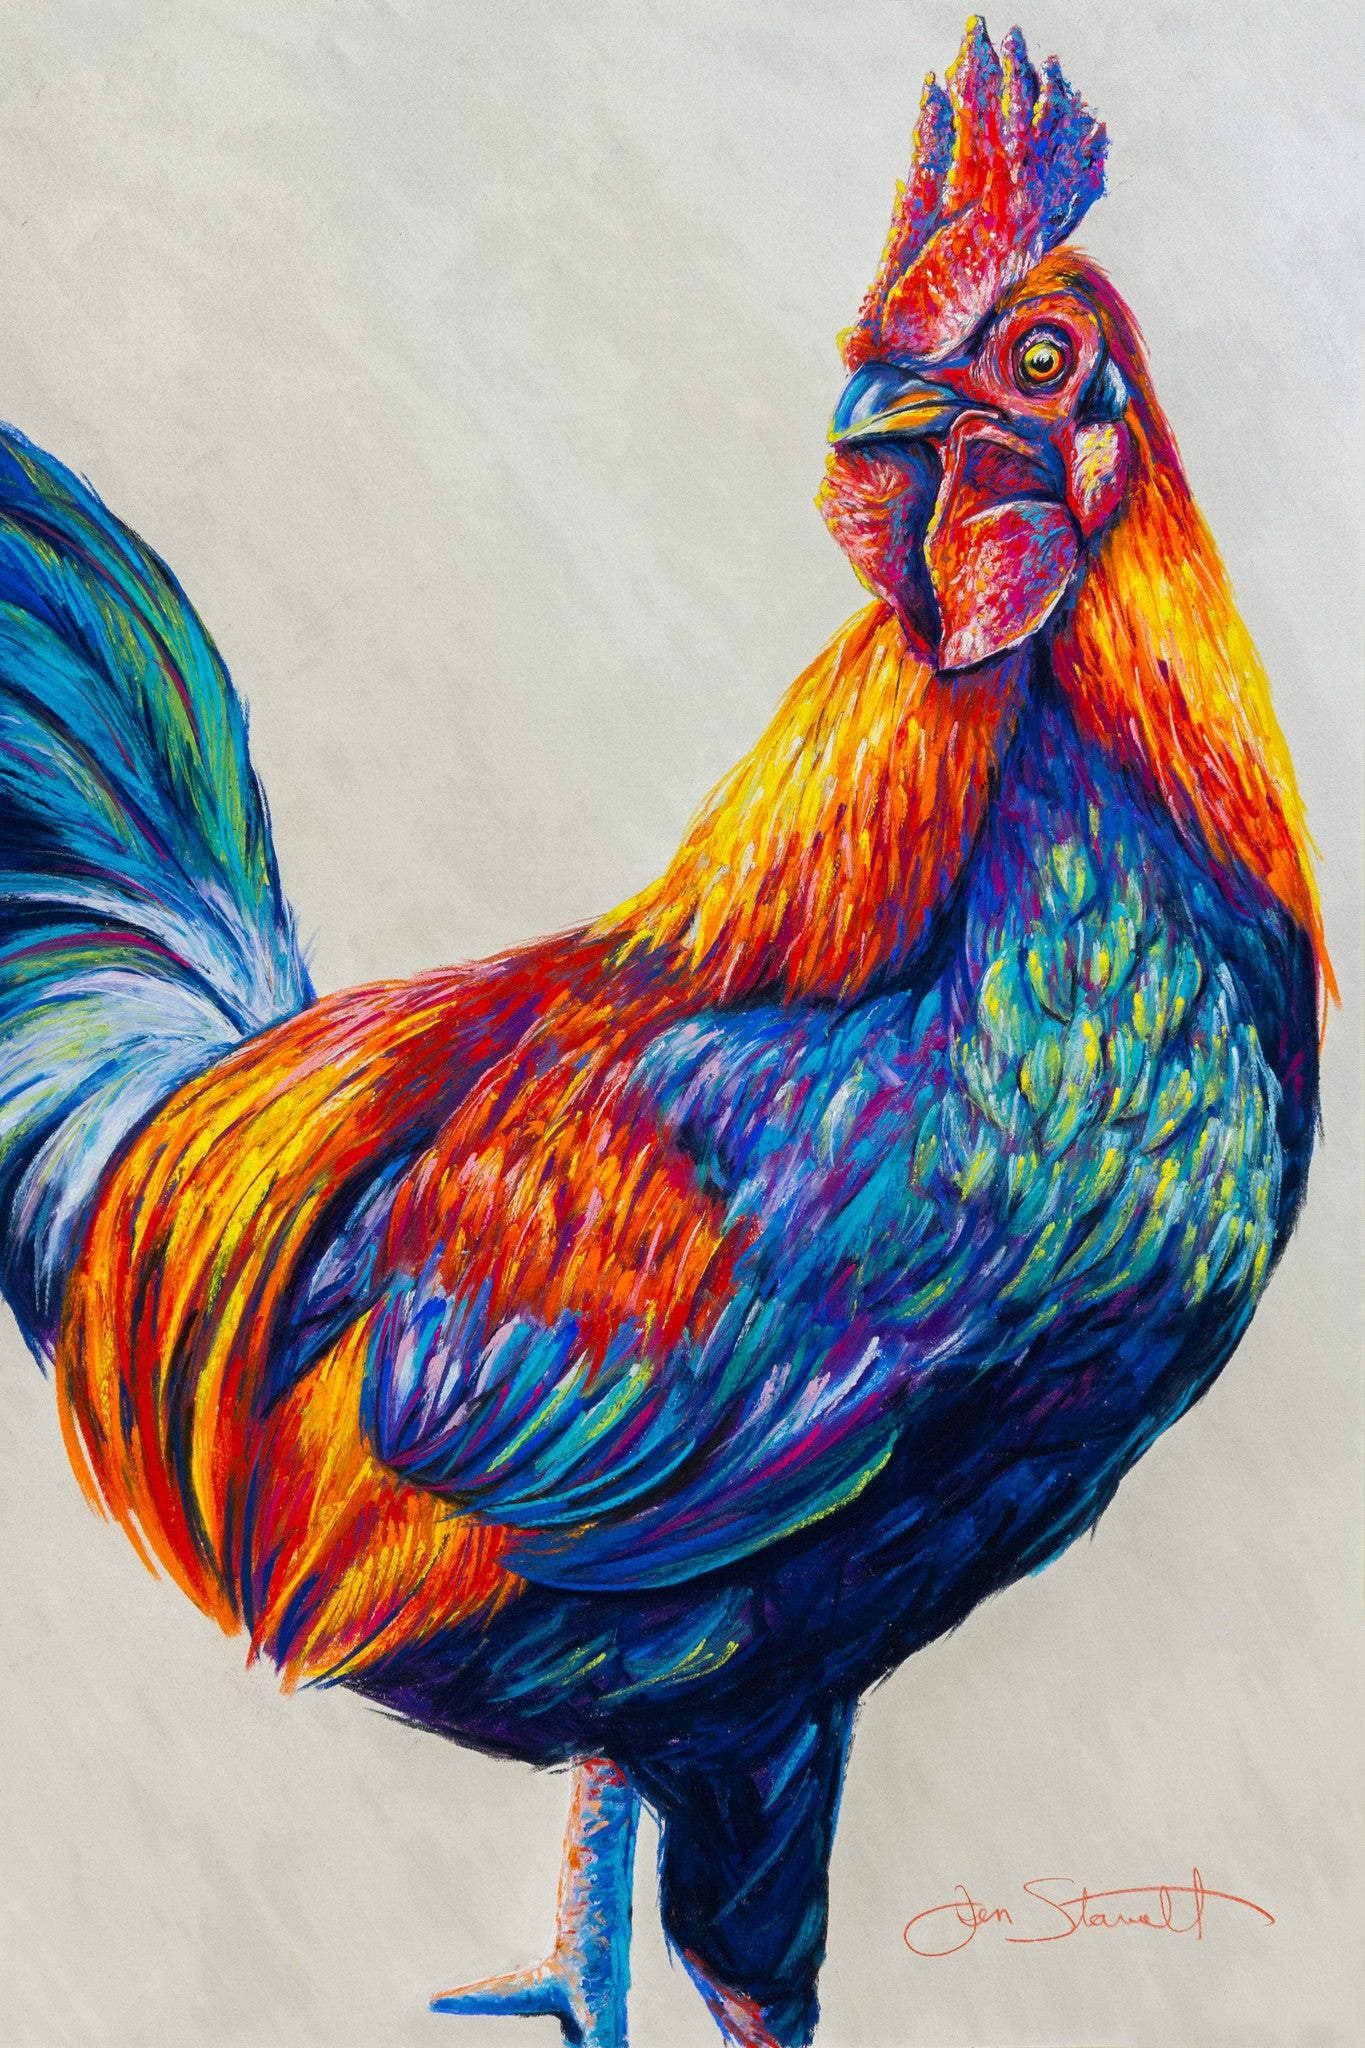 Time-lapse painting of "Call Upon The Sun" rooster